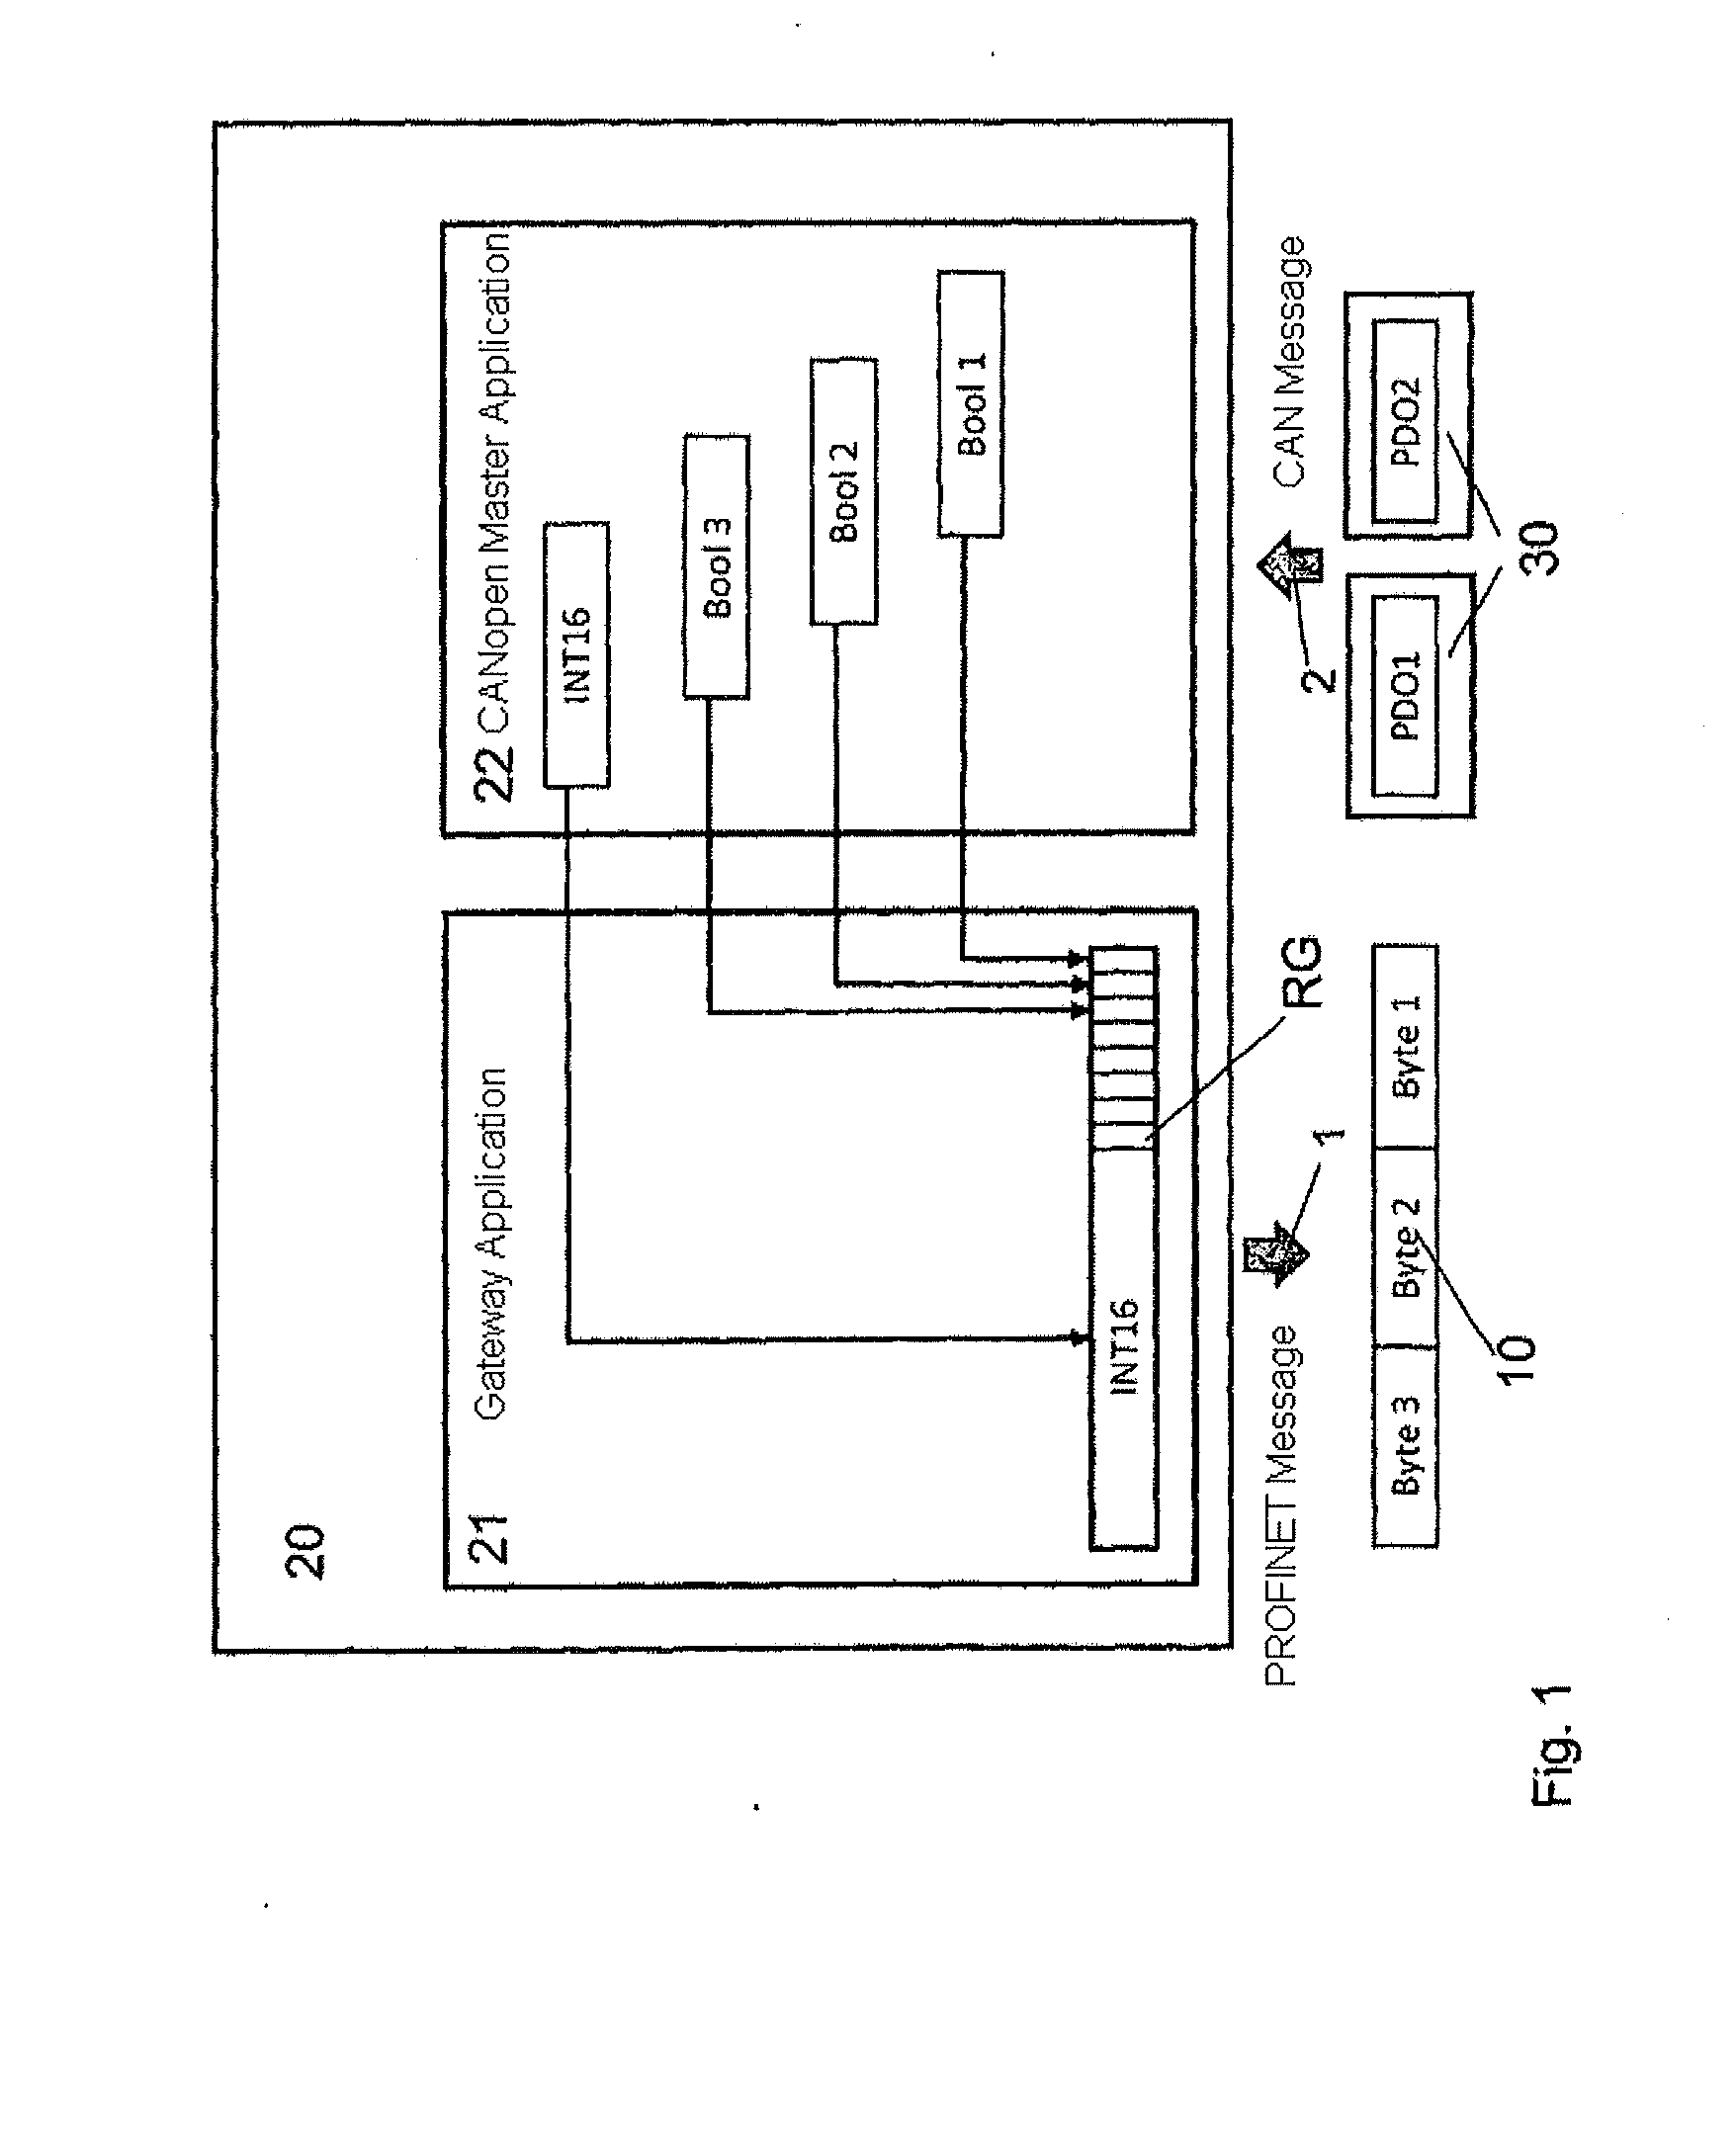 Method for transmitting a process map via a gateway device